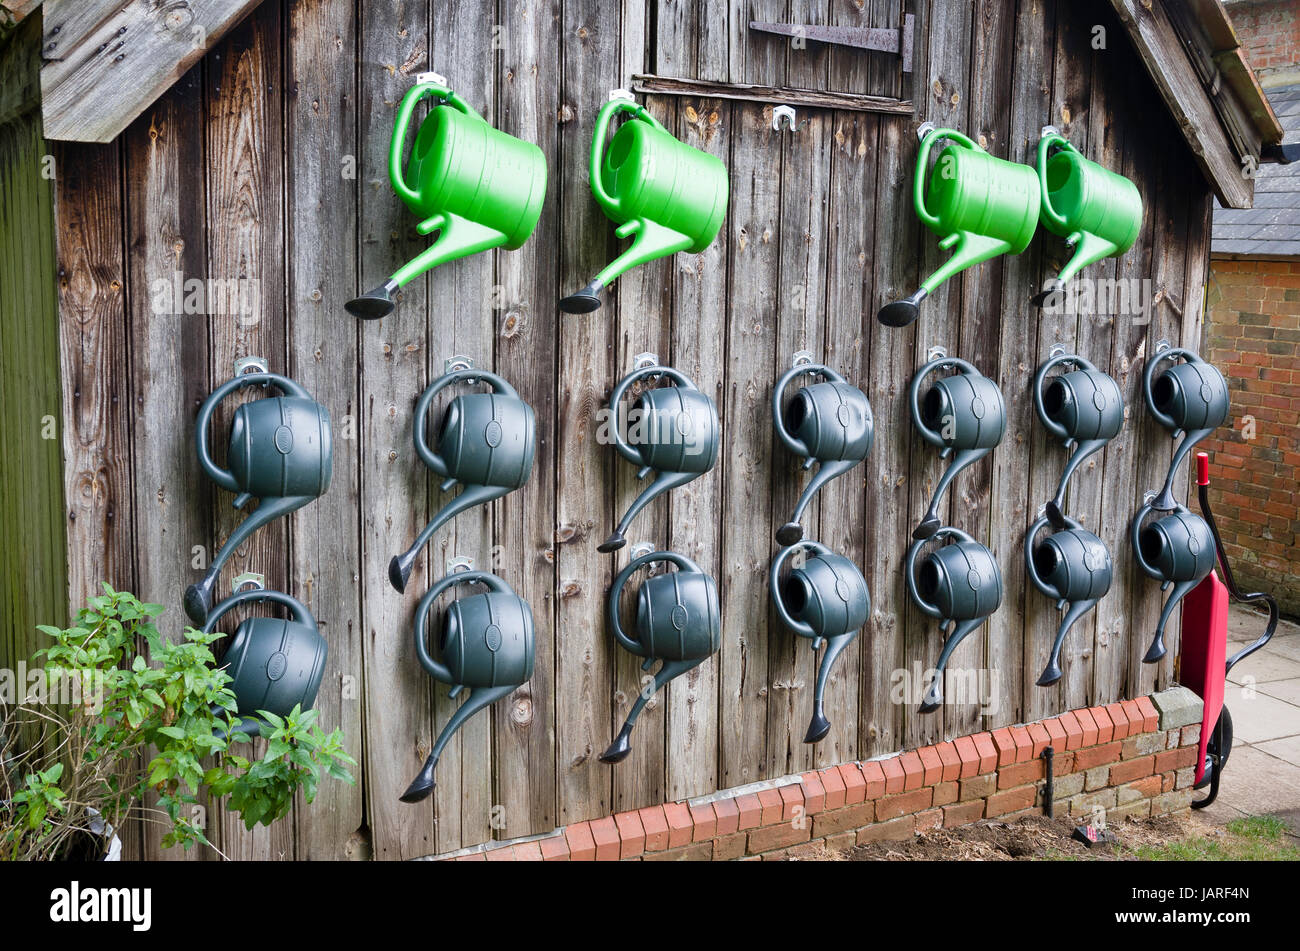 On a non-school working day the watering cans are stored neatly on the end of old building in UK Stock Photo